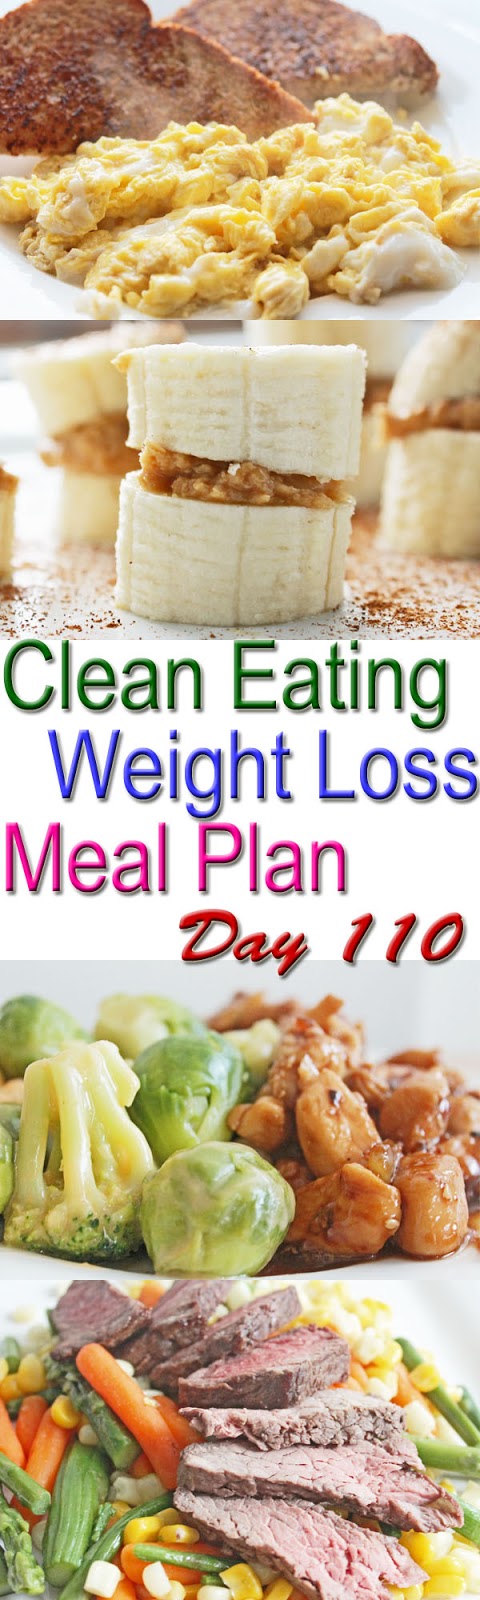 clean eating meal plan for weight loss on a budget